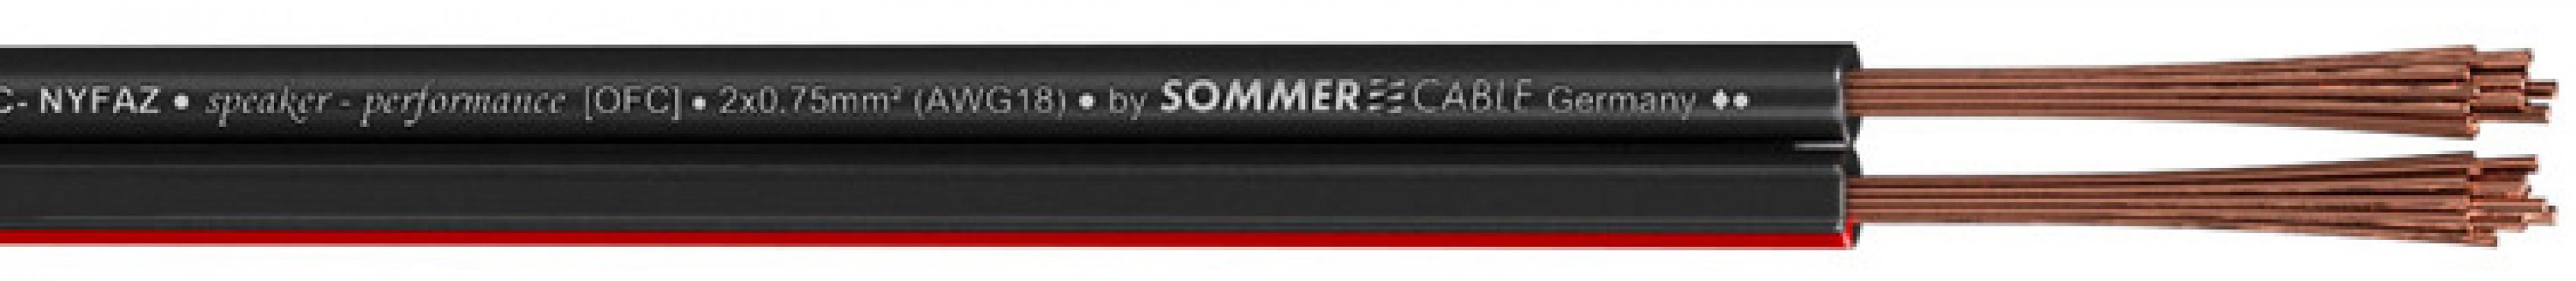 Sommer Cable 420-0075 NYFAZ-SW 2 x 0,75 mm